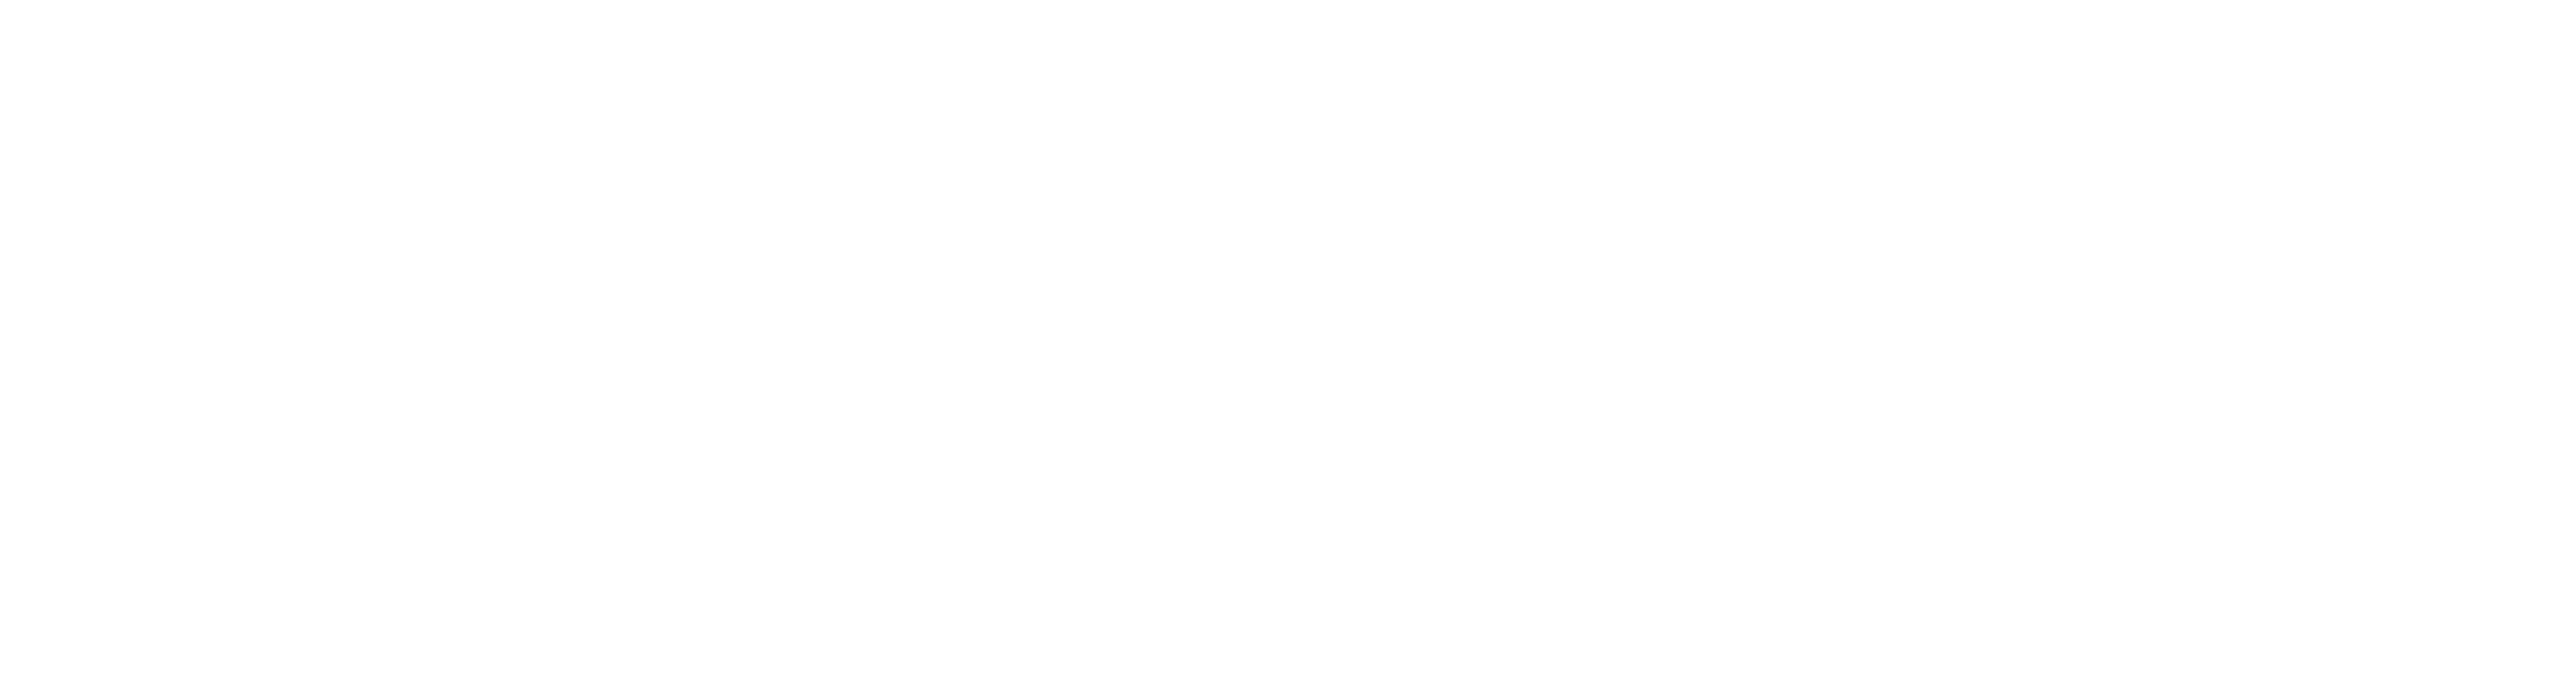 StatDoctor name and logo in white on no background